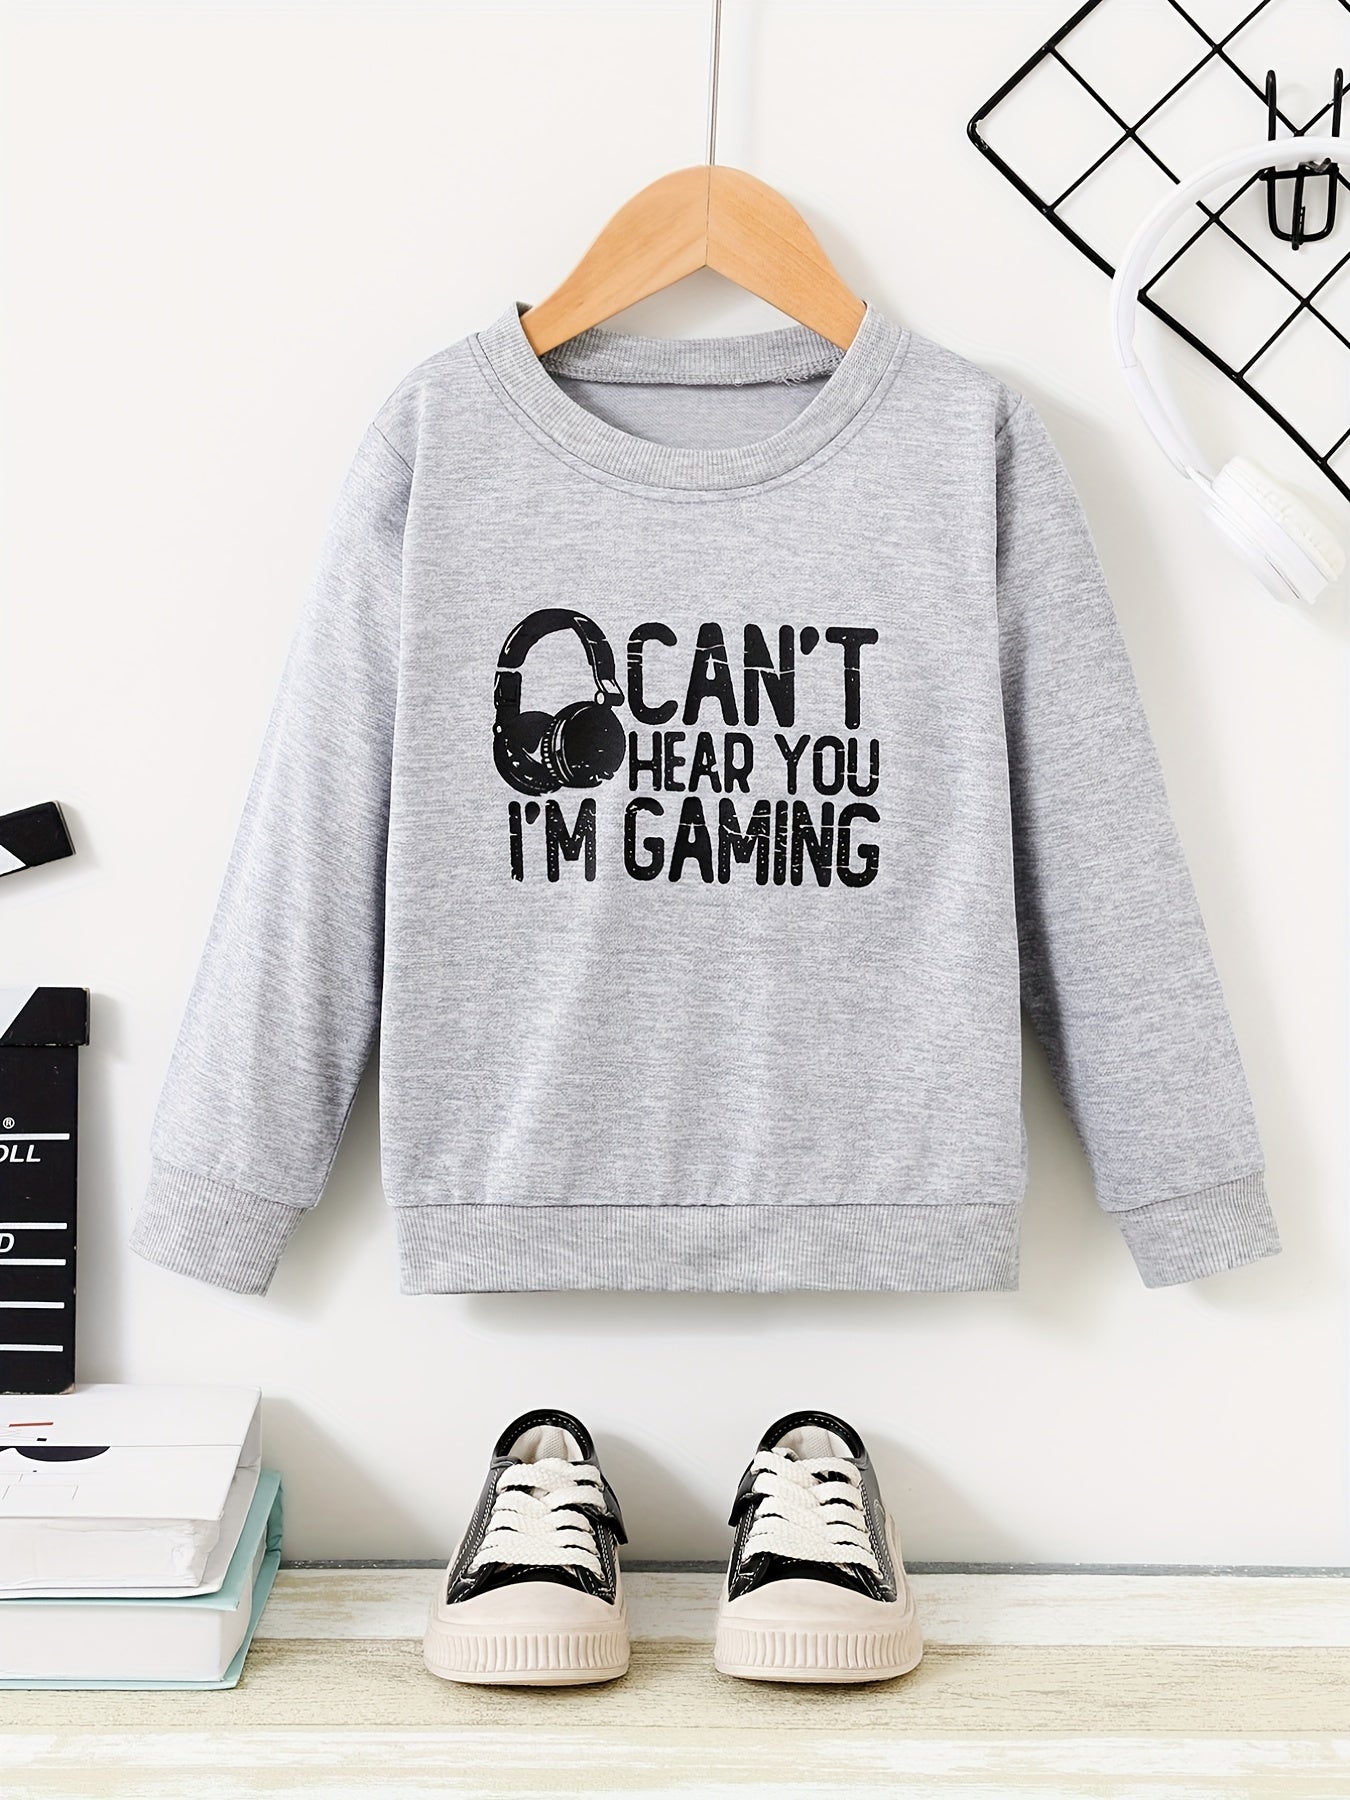 Earphone Print Kid's Sweatshirt, CAN'T HEAR YOU, I'M GAMING Print Causal Long Sleeve Top, Boy's Clothes For Spring Fall Winter